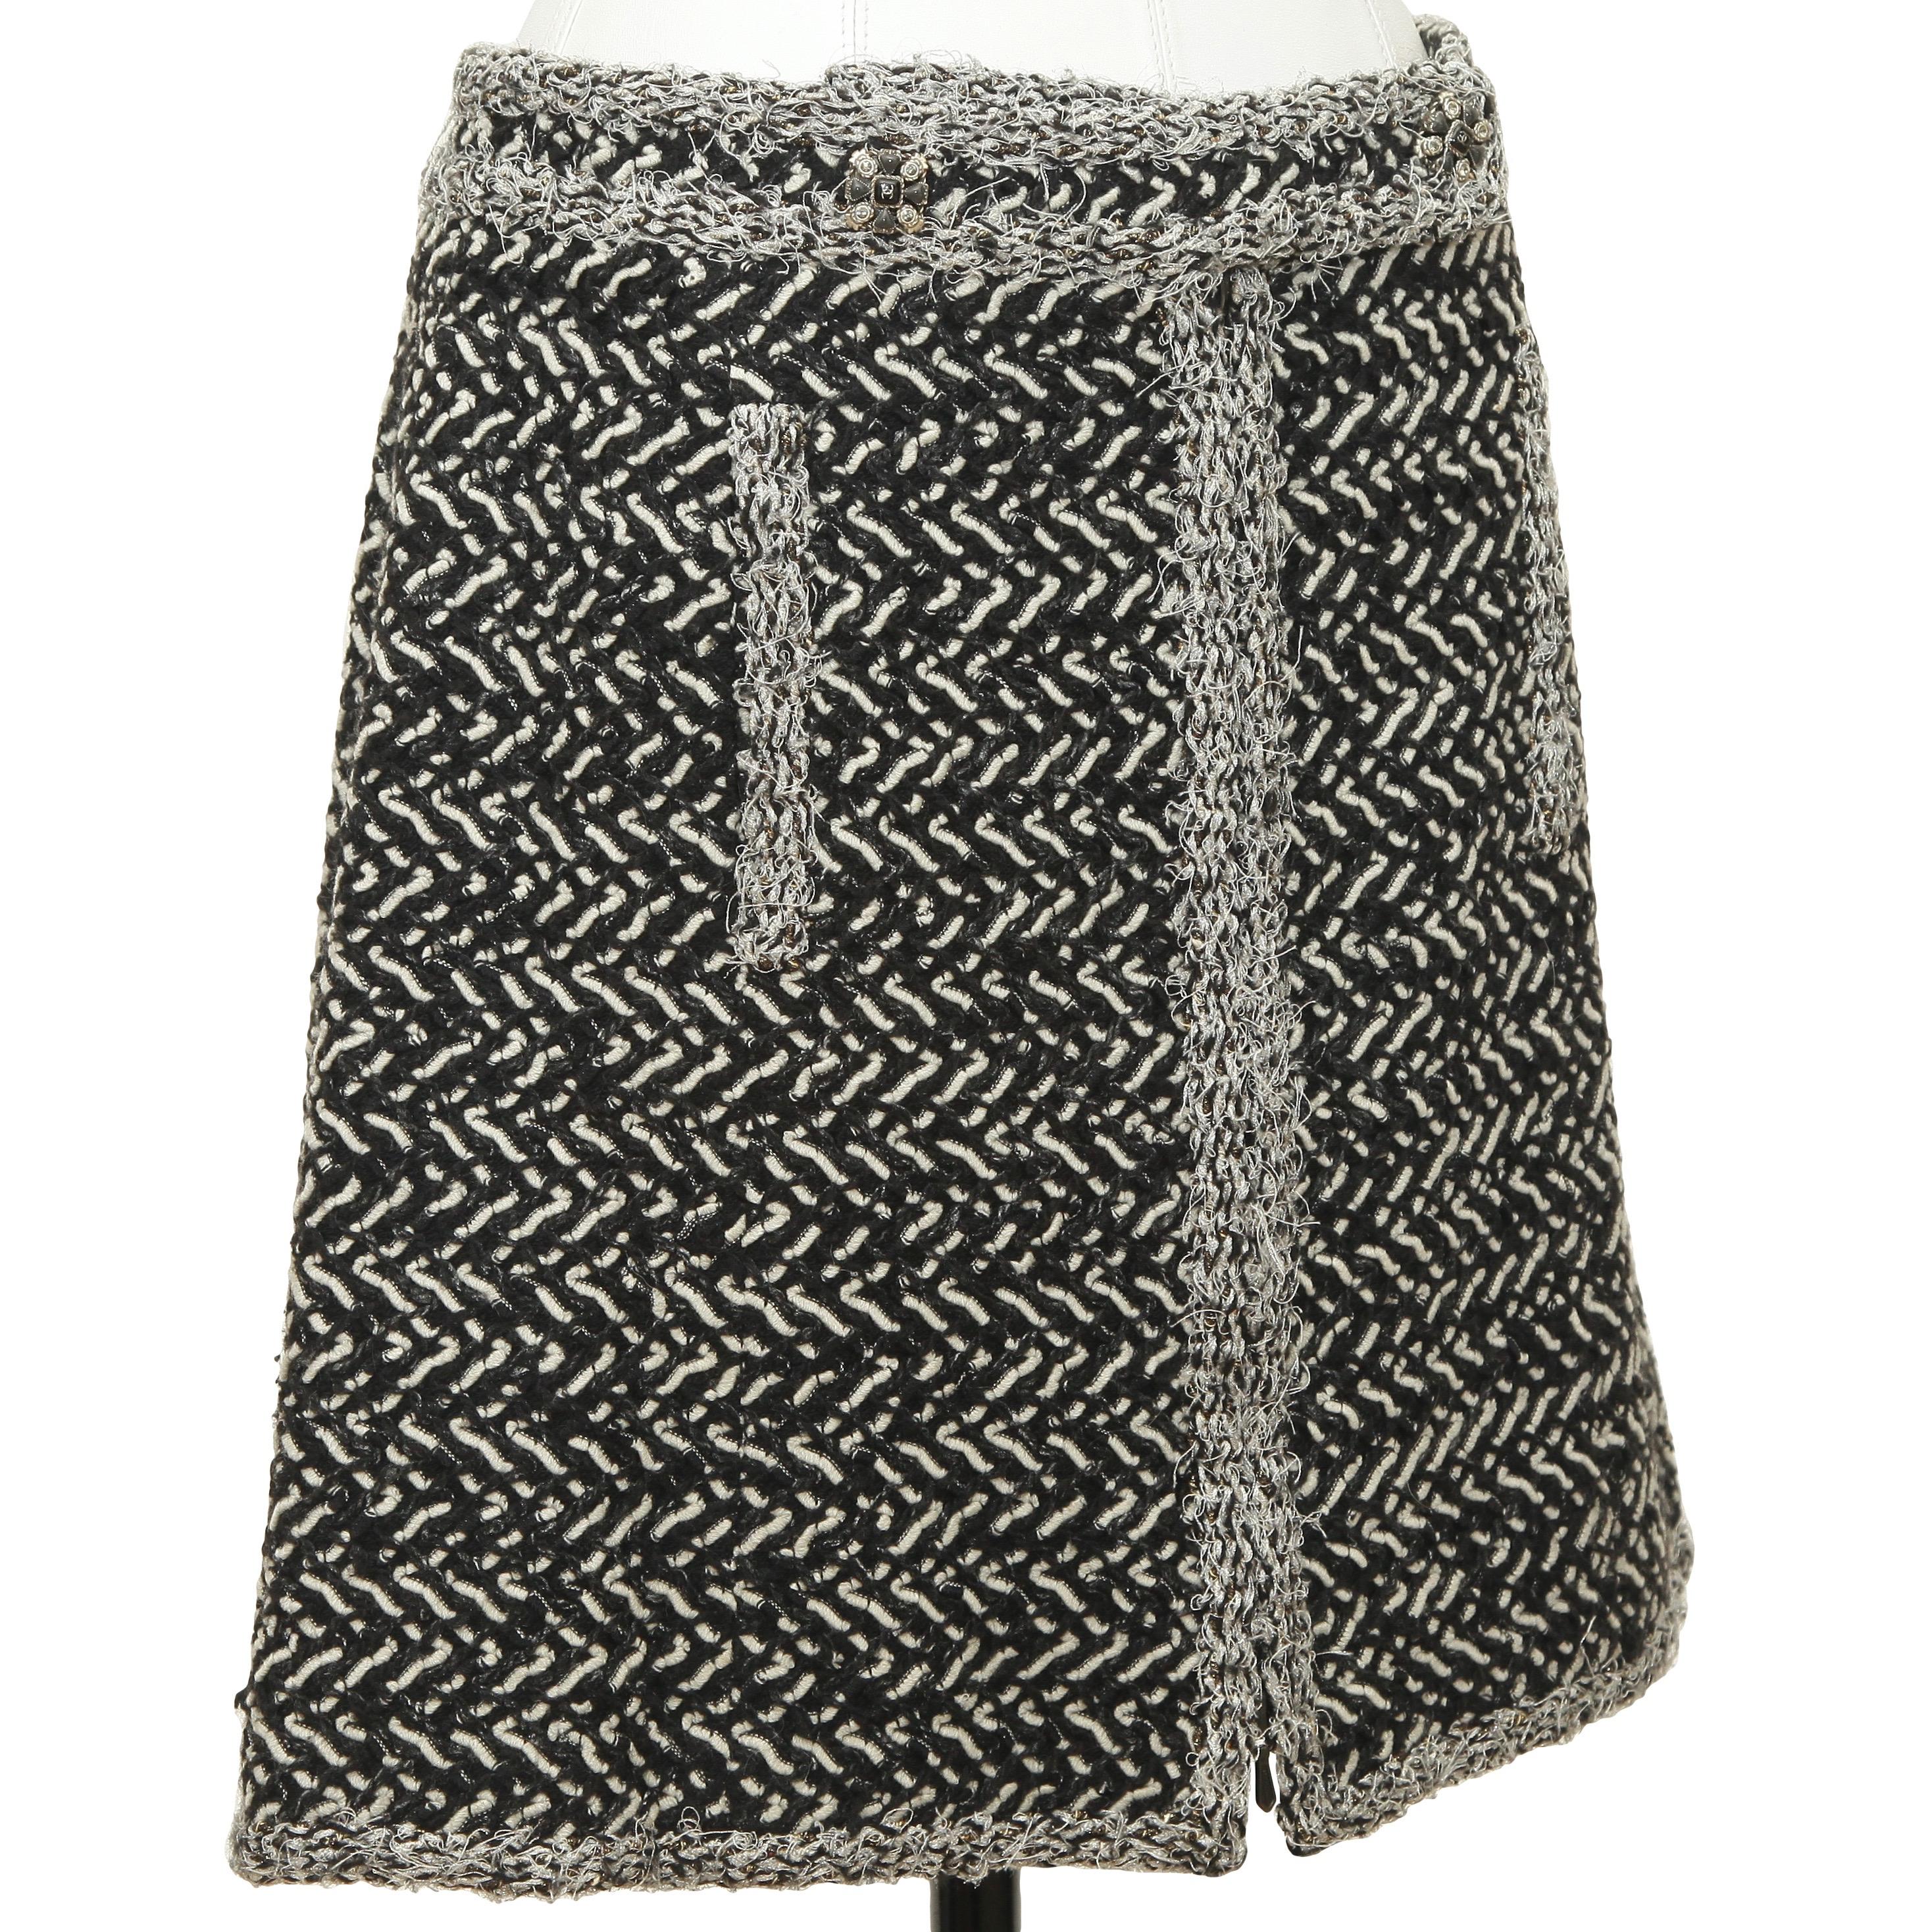 GUARANTEED AUTHENTIC CHANEL 2011A BLACK METALLIC TWEED SKIRT



Design:
- Black/off white and metallic mini tweed skirt from the 2011A collection.
- 2 way front zipper/gripoix button closure.
- Dual vertical pockets.
- Fully lined.
- Beautiful